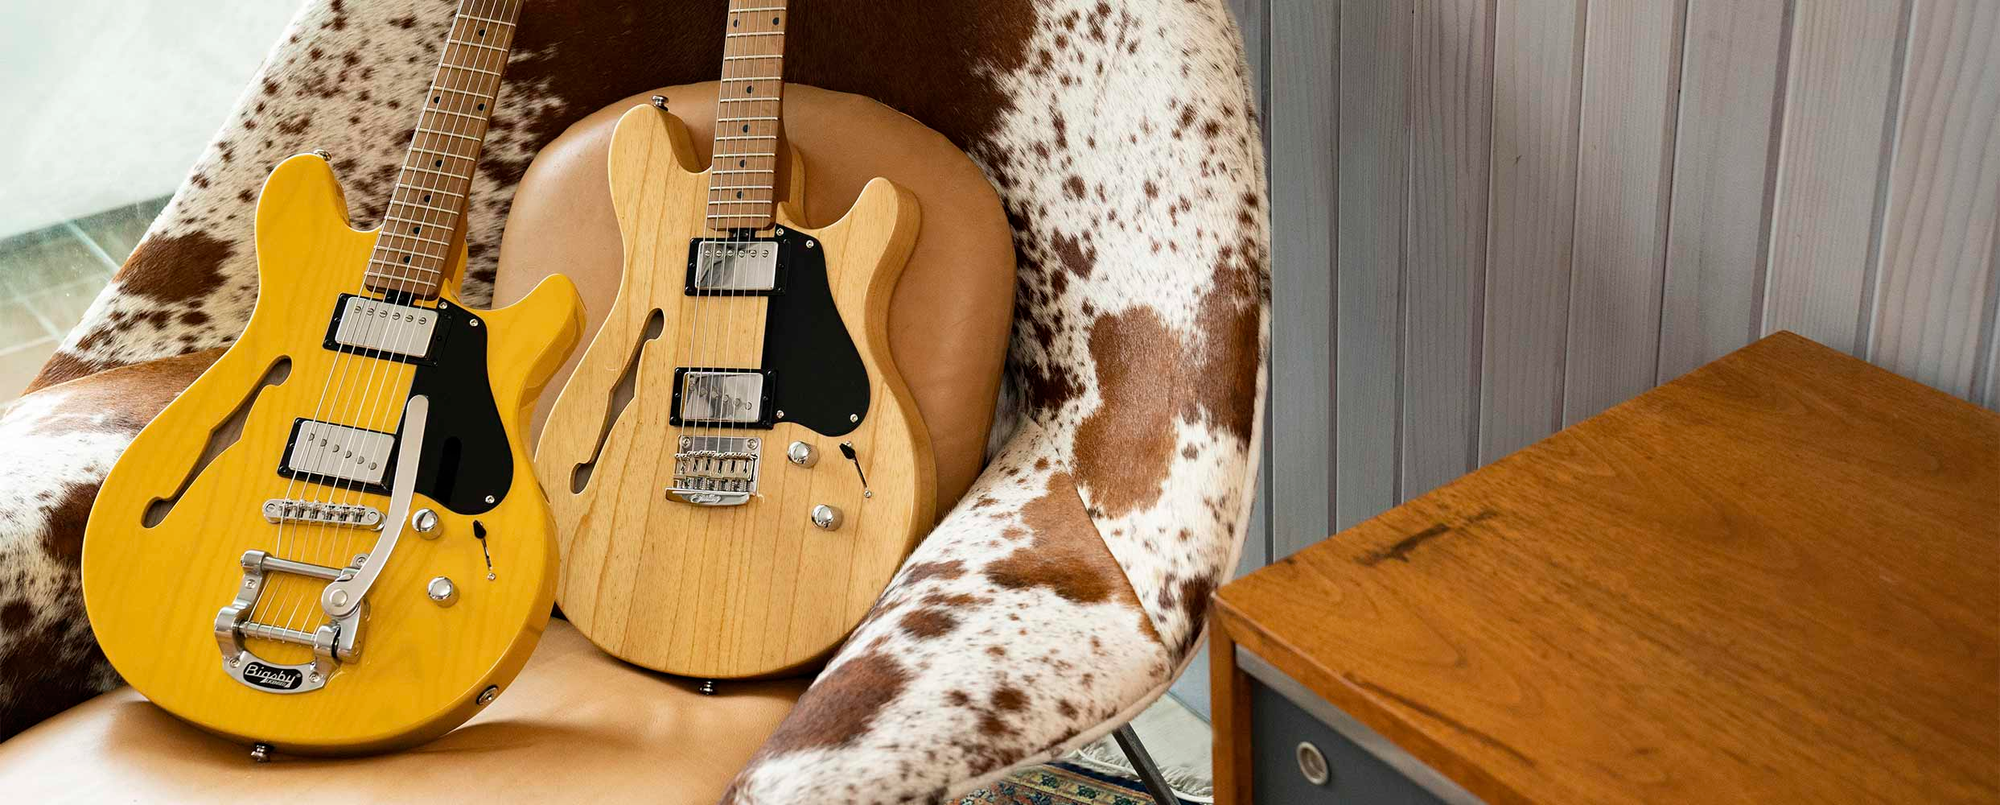 Two chambered valentine guitars on a cowhide chair